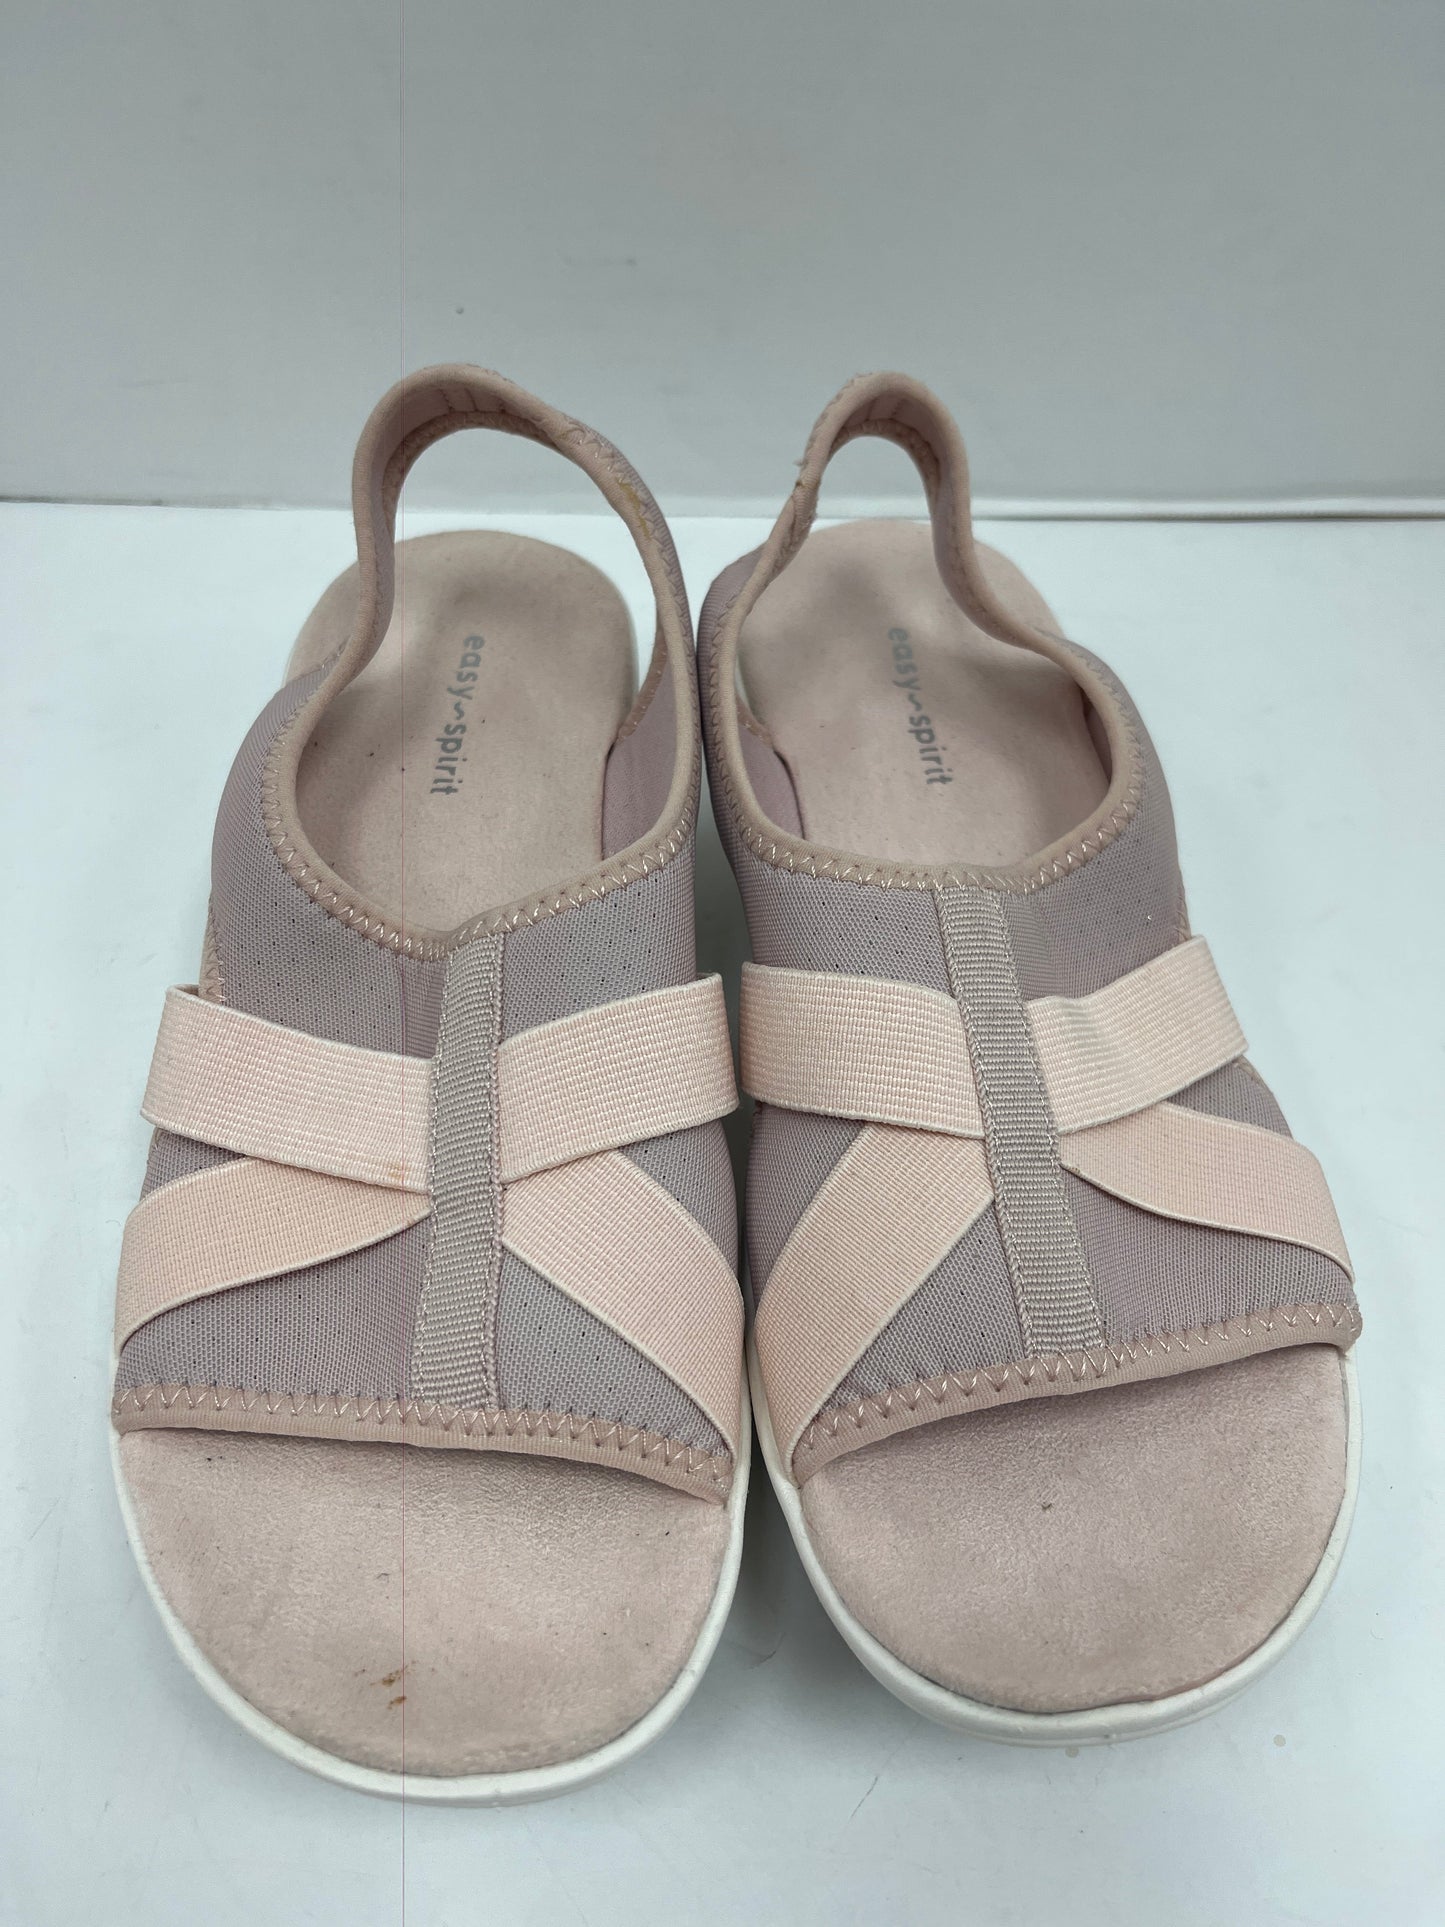 Sandals Flats By Easy Spirit  Size: 7